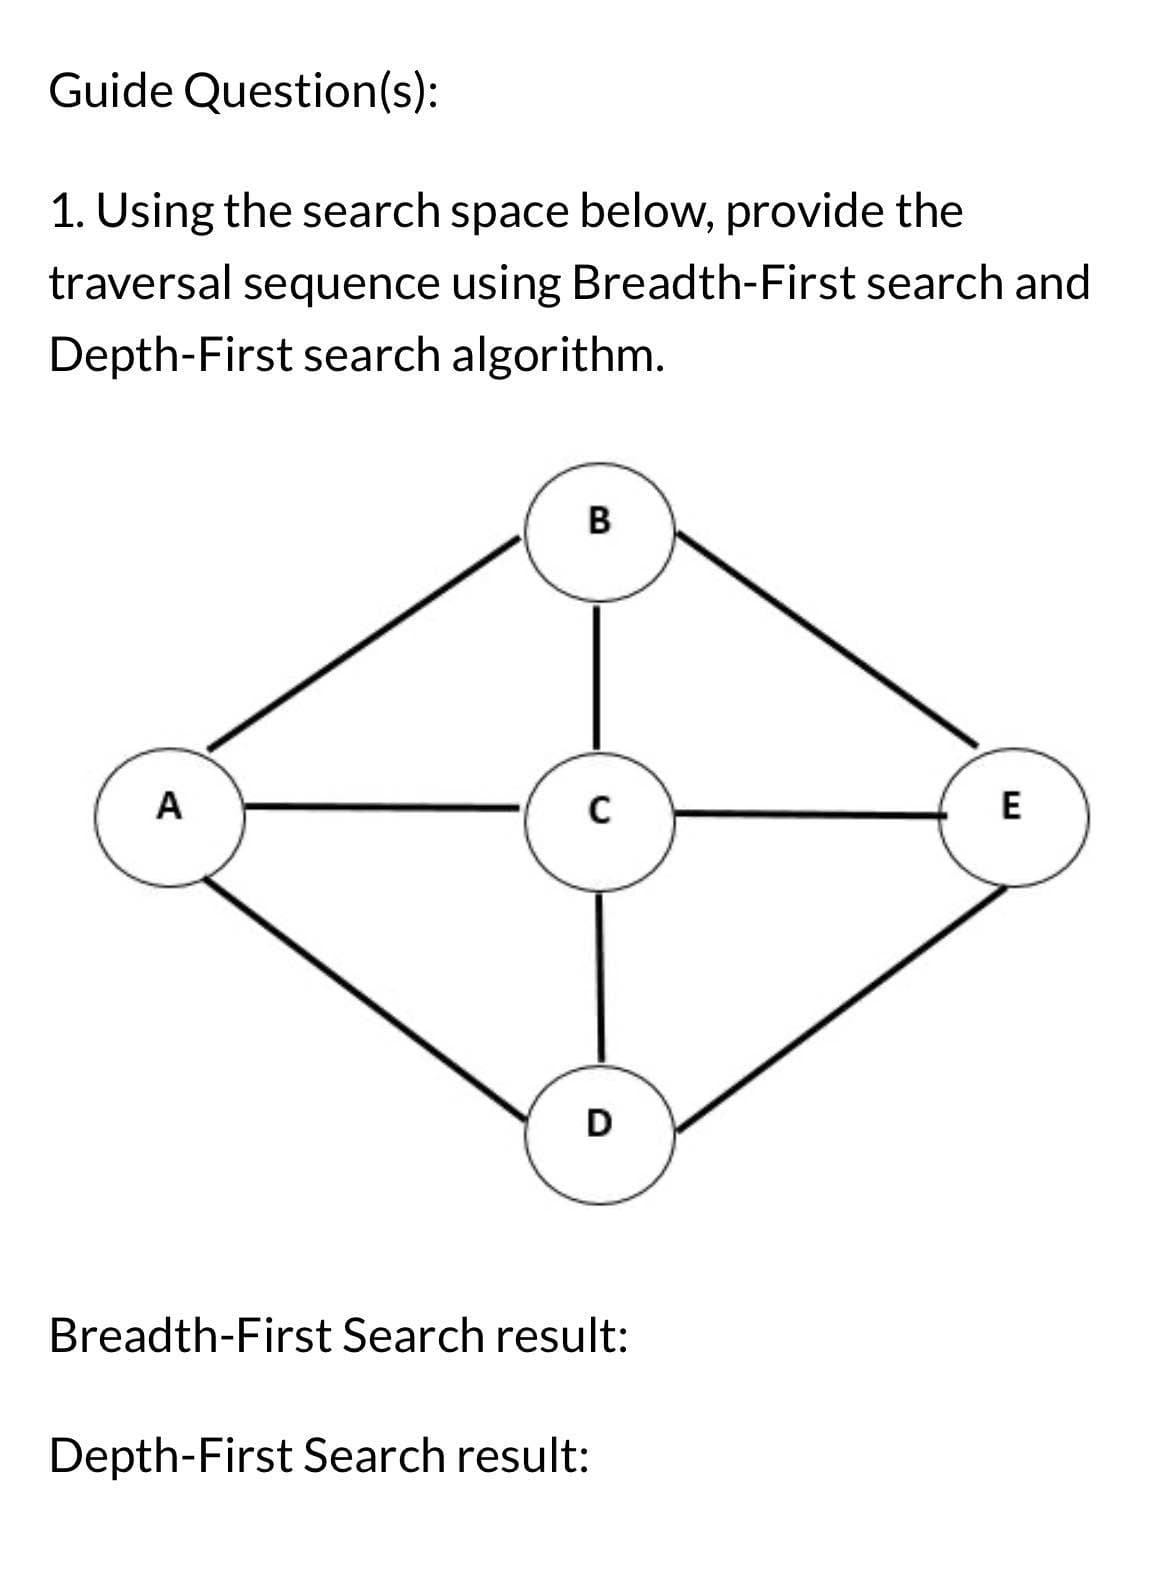 Guide Question(s):
1. Using the search space below, provide the
traversal sequence using Breadth-First search and
Depth-First search algorithm.
A
B
C
D
Breadth-First Search result:
Depth-First Search result:
E